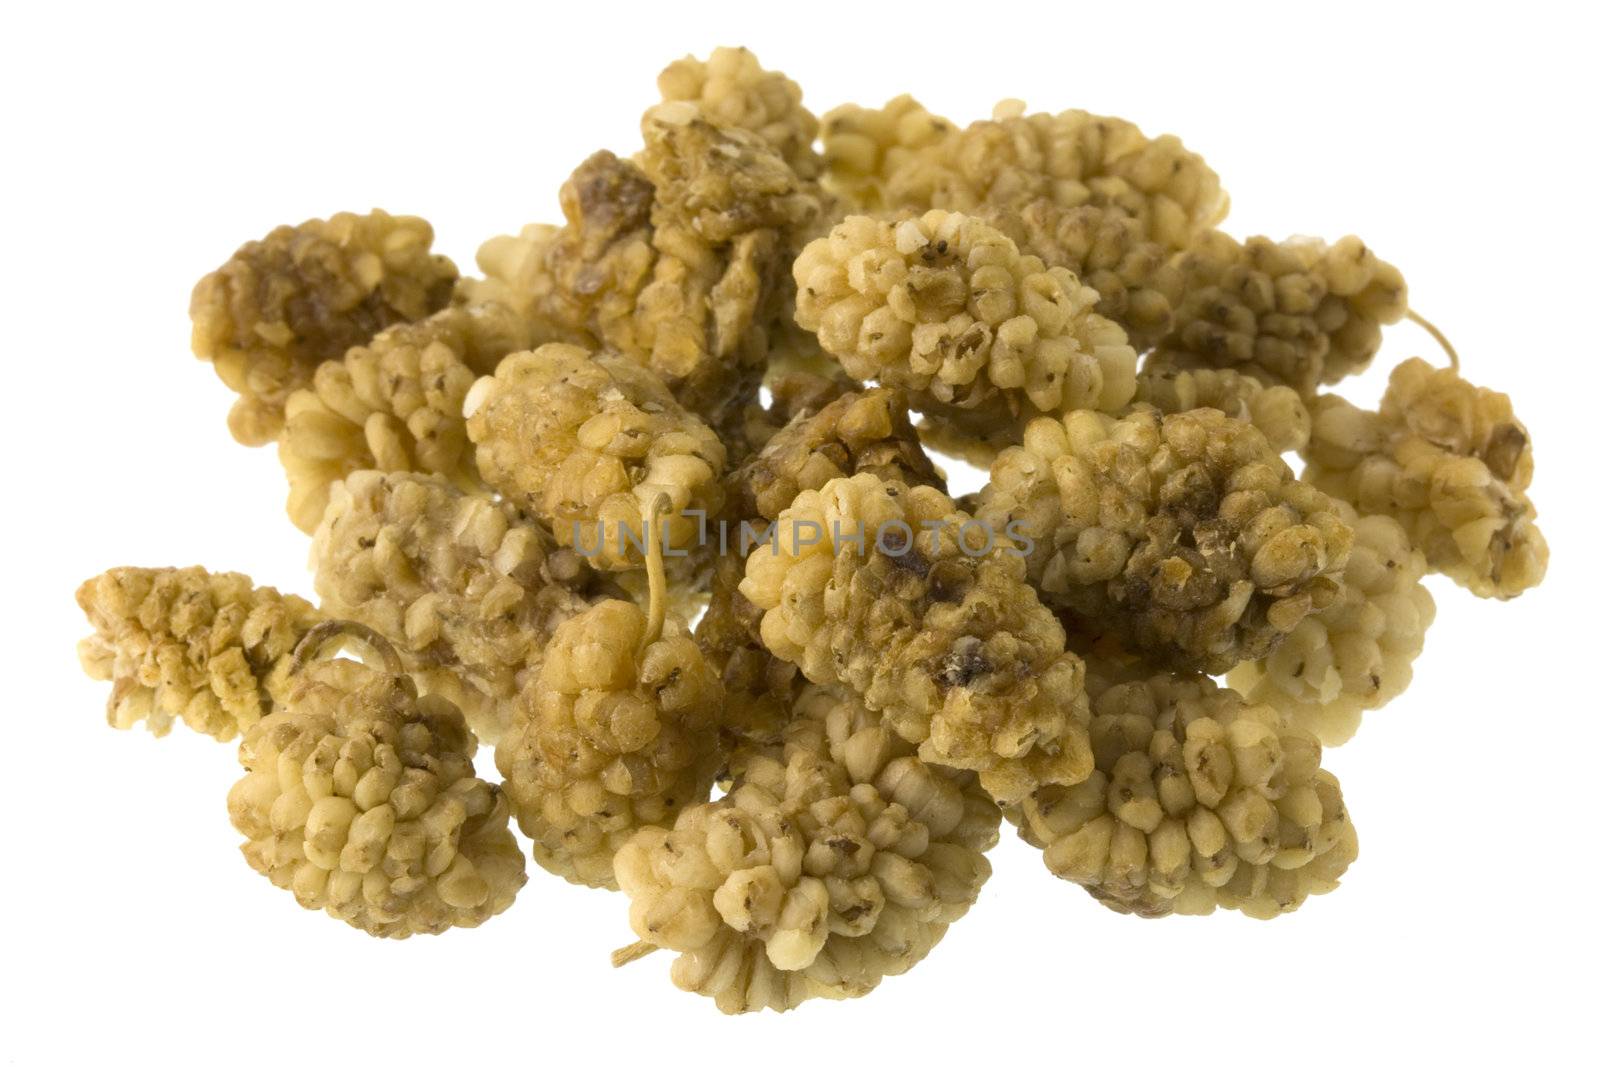 a pile of dried mulberry fruits isolated on white background